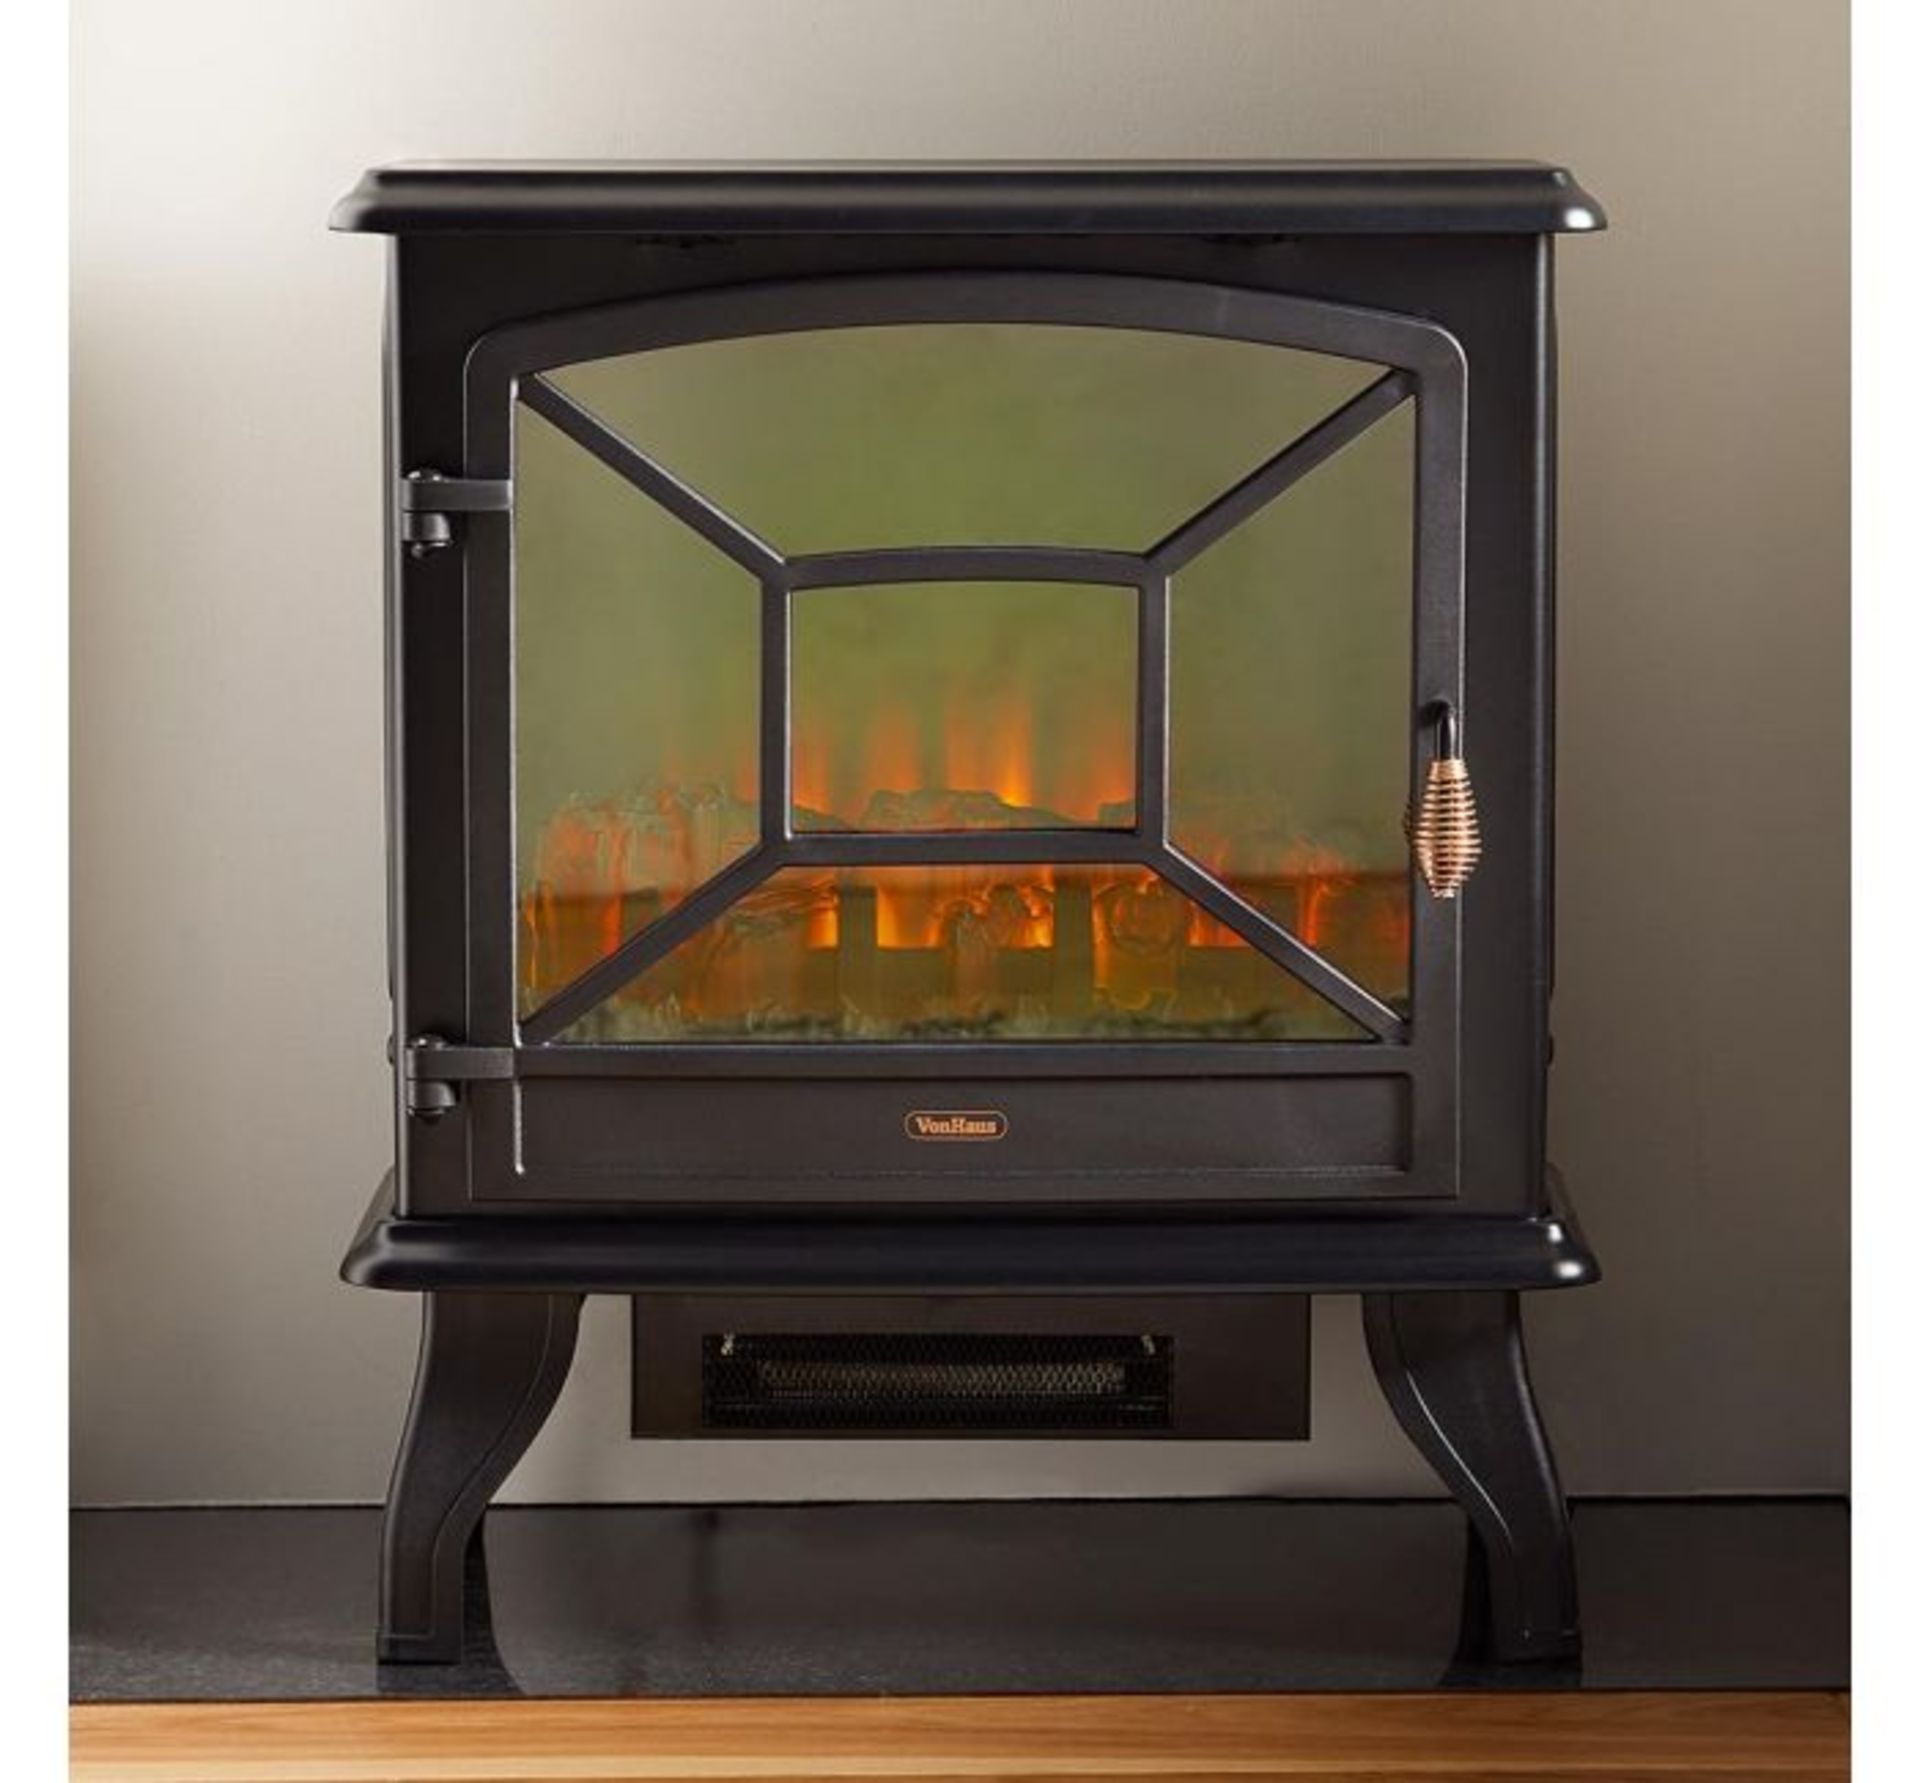 (HZ111) 1800W Black Panoramic Stove Heater Three tempered glass panels give a panoramic view o...